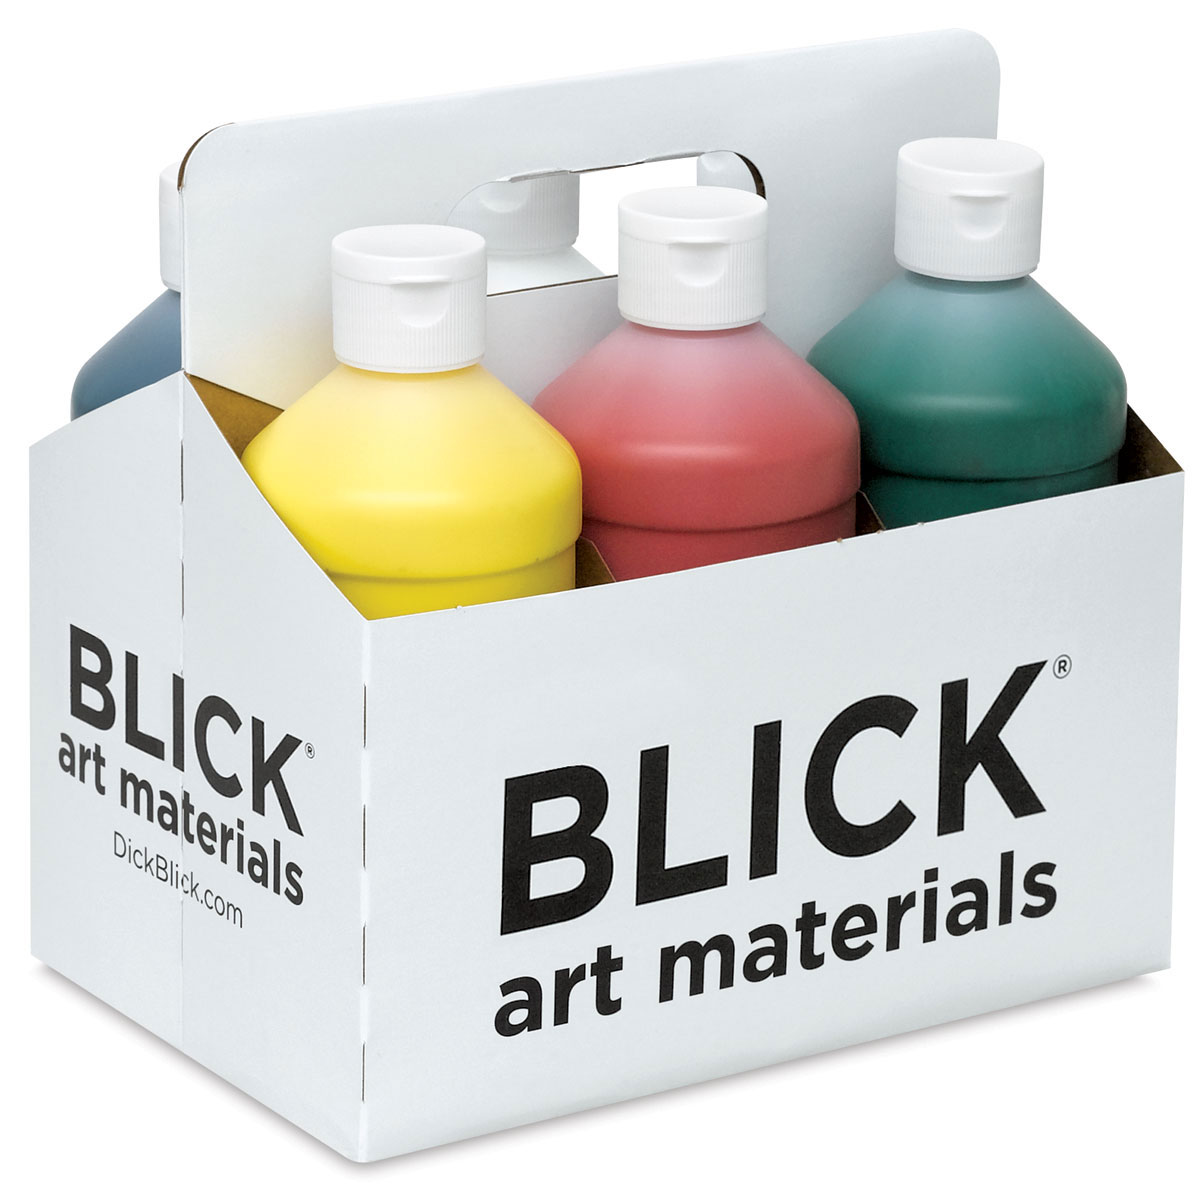 Blickrylic Student Acrylics - Primary Colors, Set of 6, 2 oz